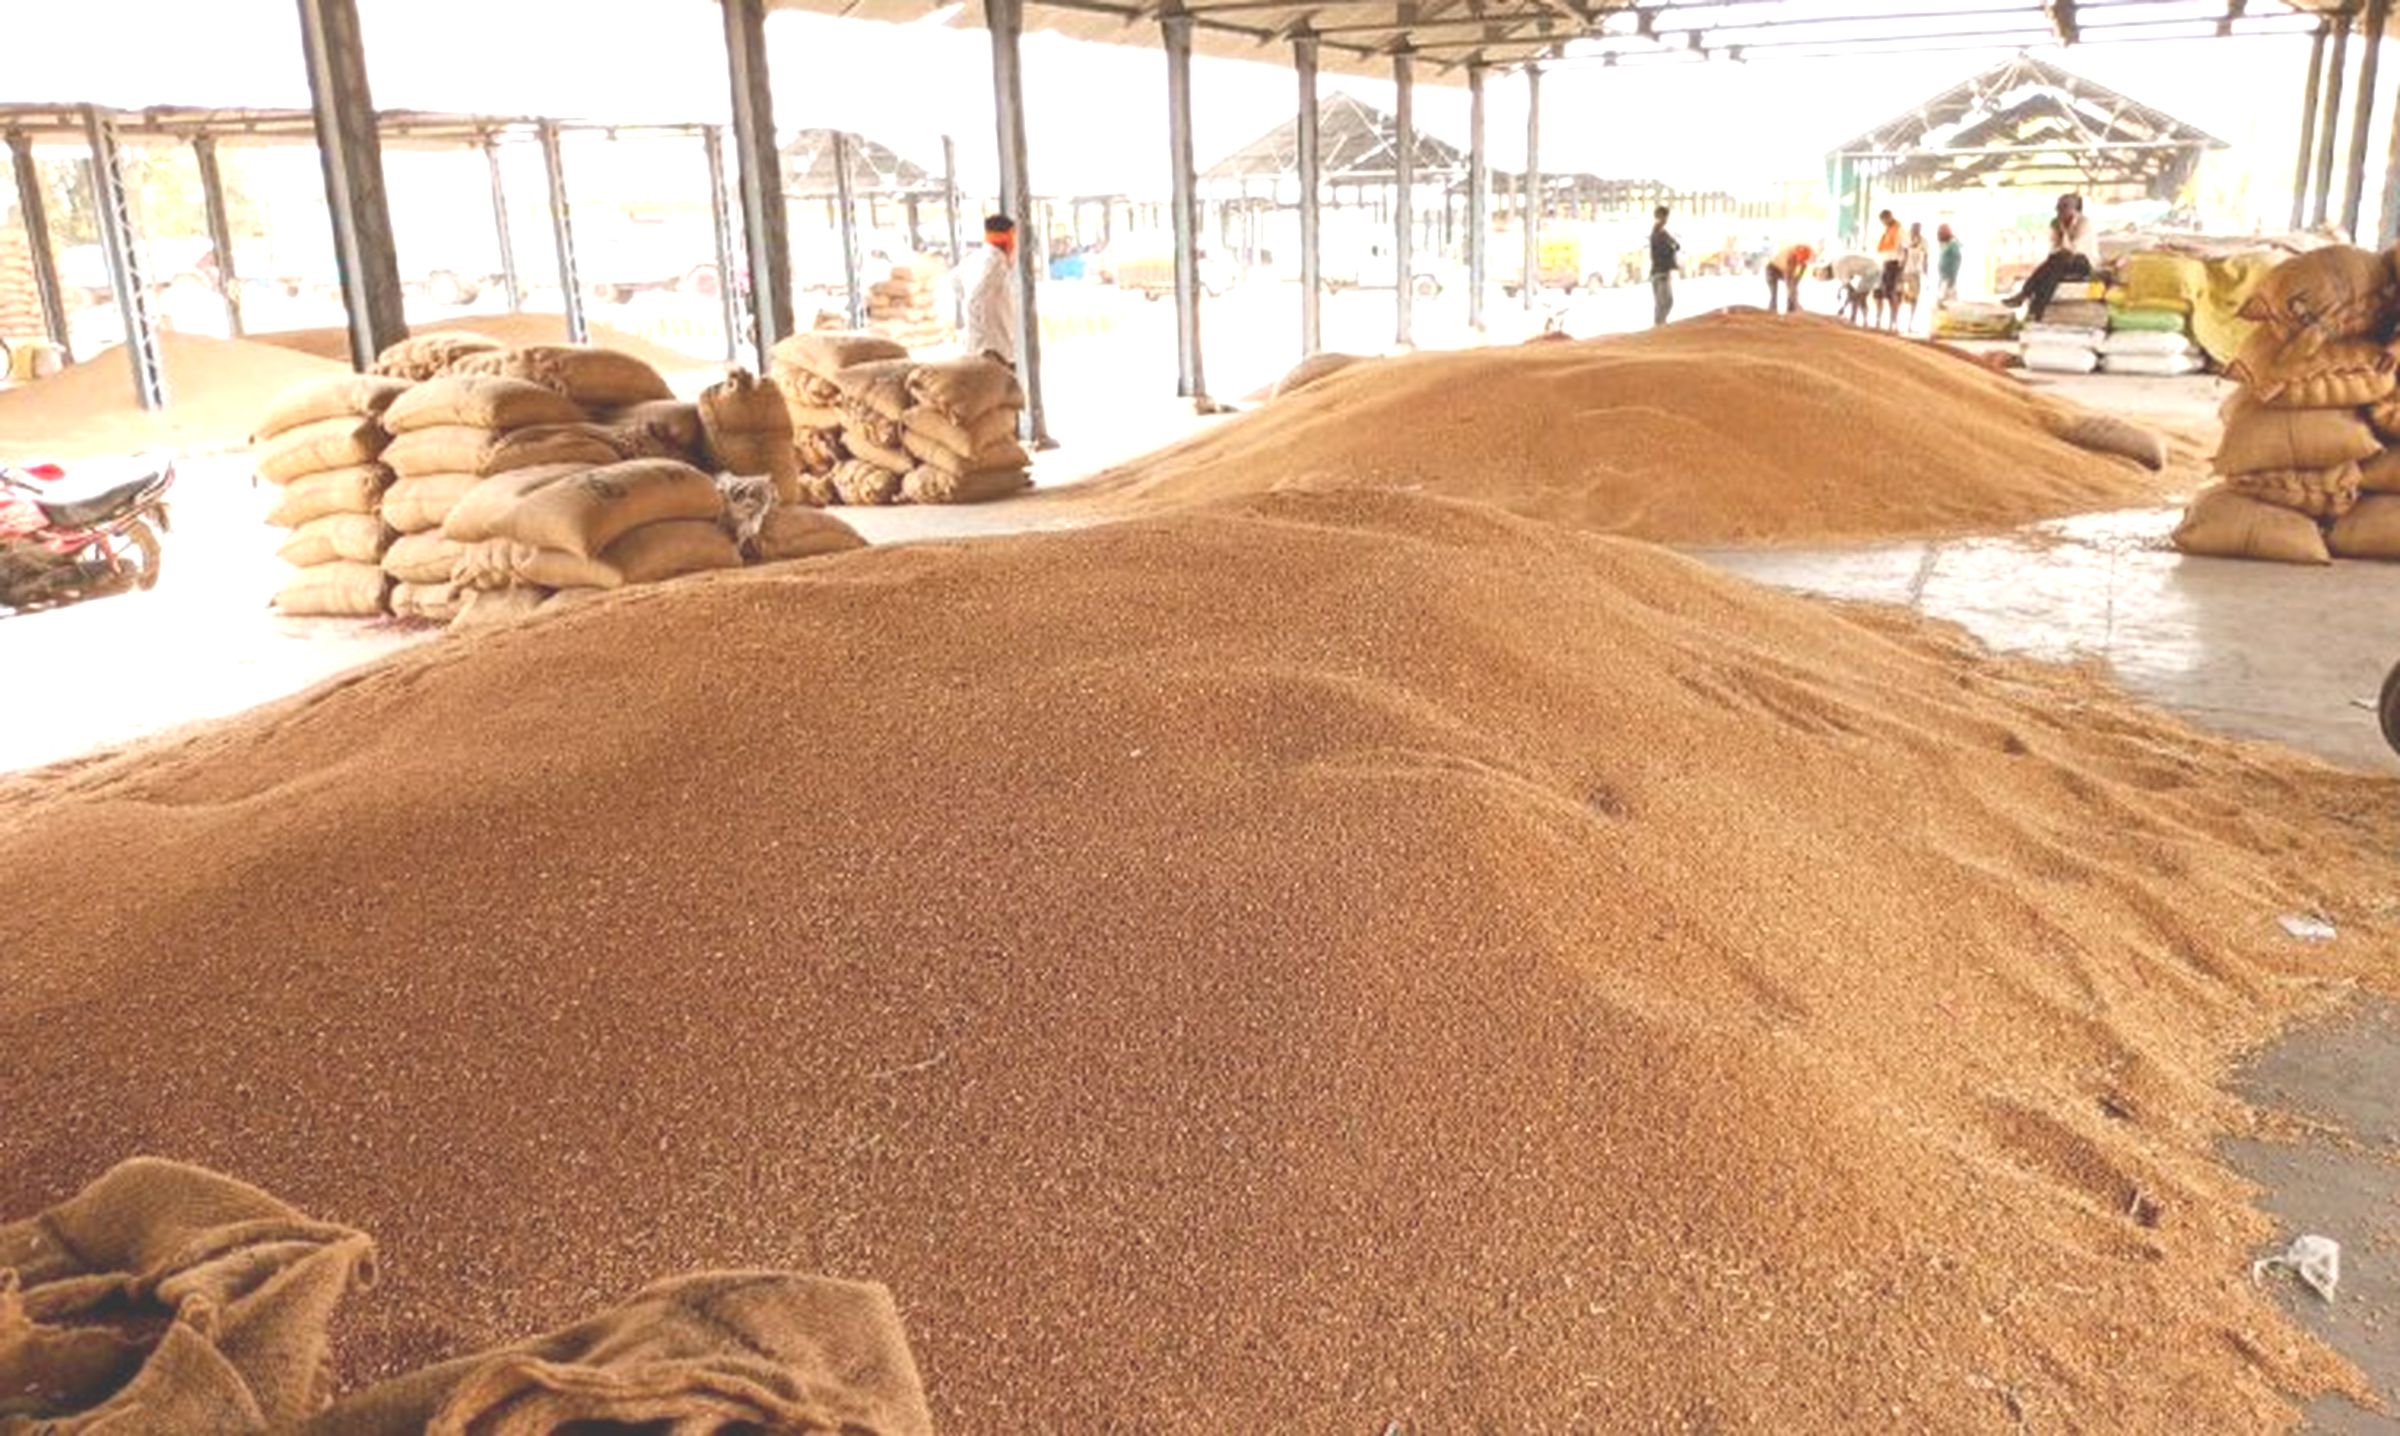 Export resumes at Kandla port, Burhanpur expected to sell wheat worth more than 50 lakhs